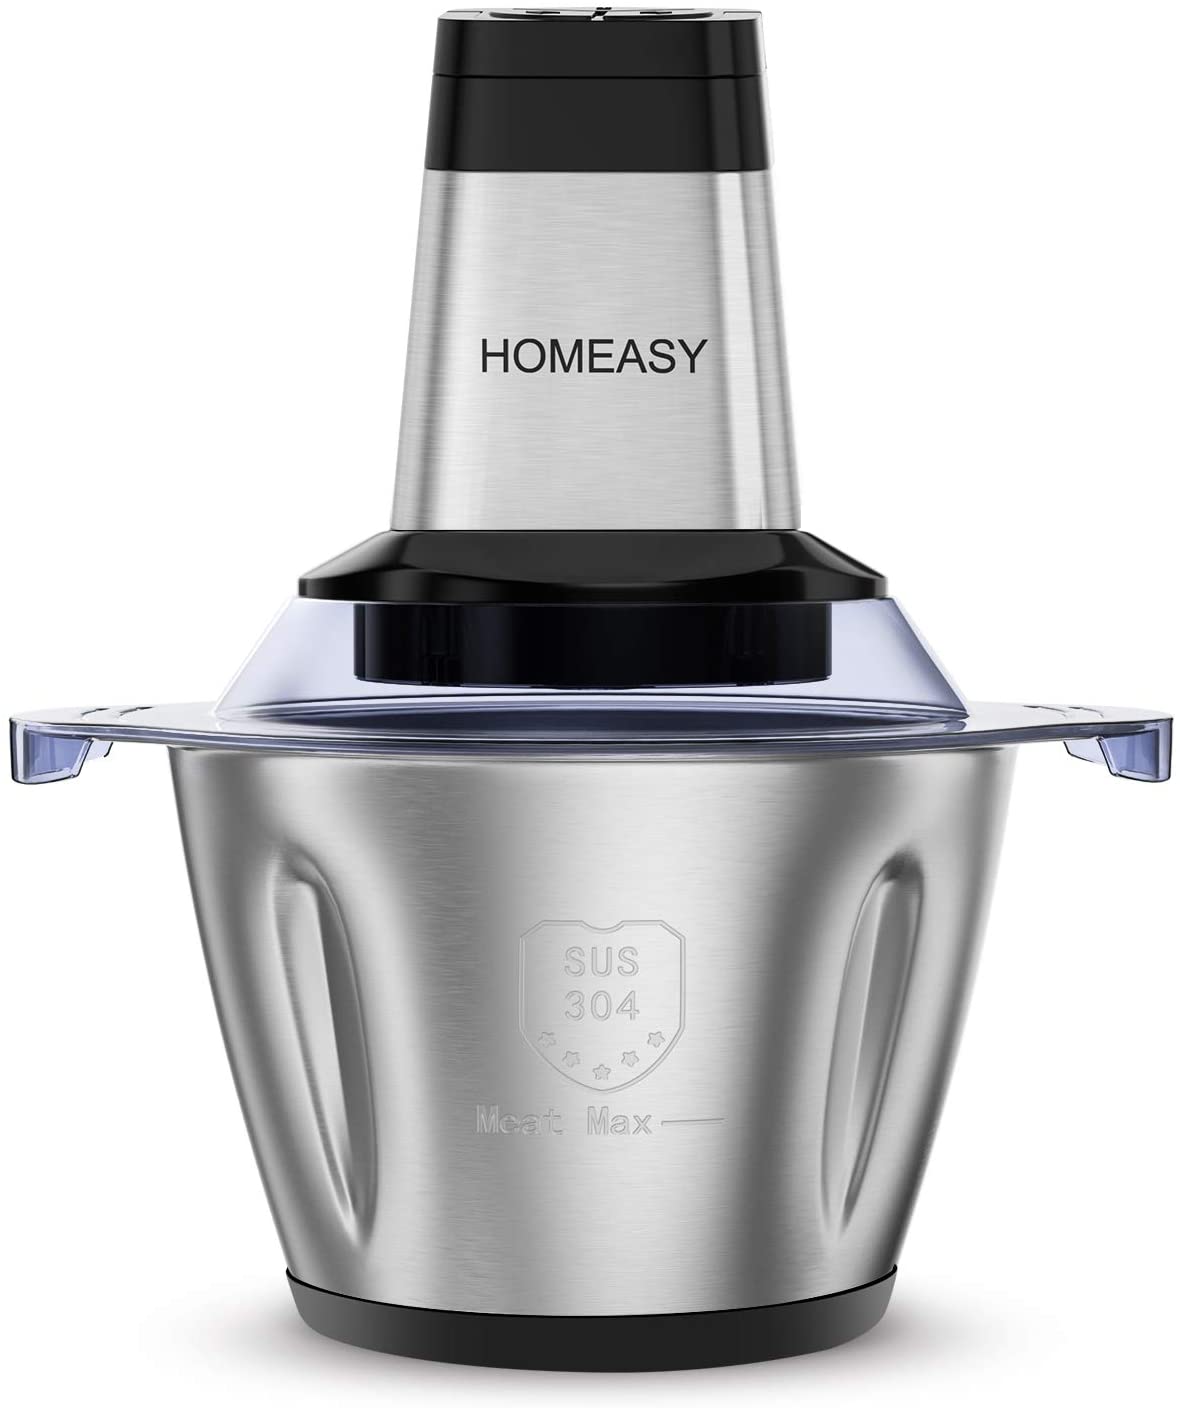 Homeasy Electric Universal Chopper with Strong Motor, 2.5 L Stainless Steel Bowl, 500 W Electric Multi Chopper